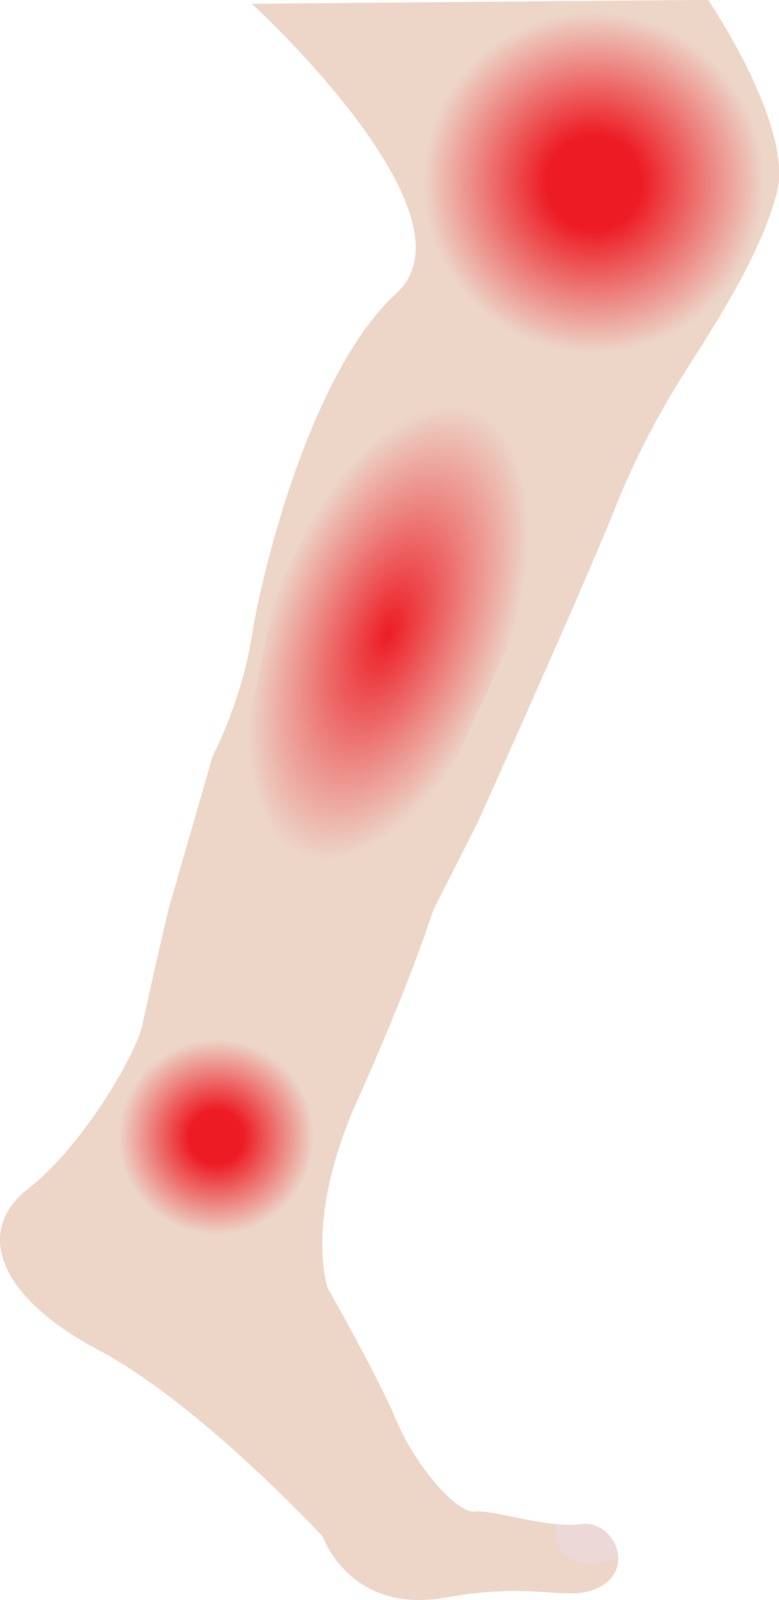 Swelling of the leg and ankles from infected or injury vector illustration on a white background